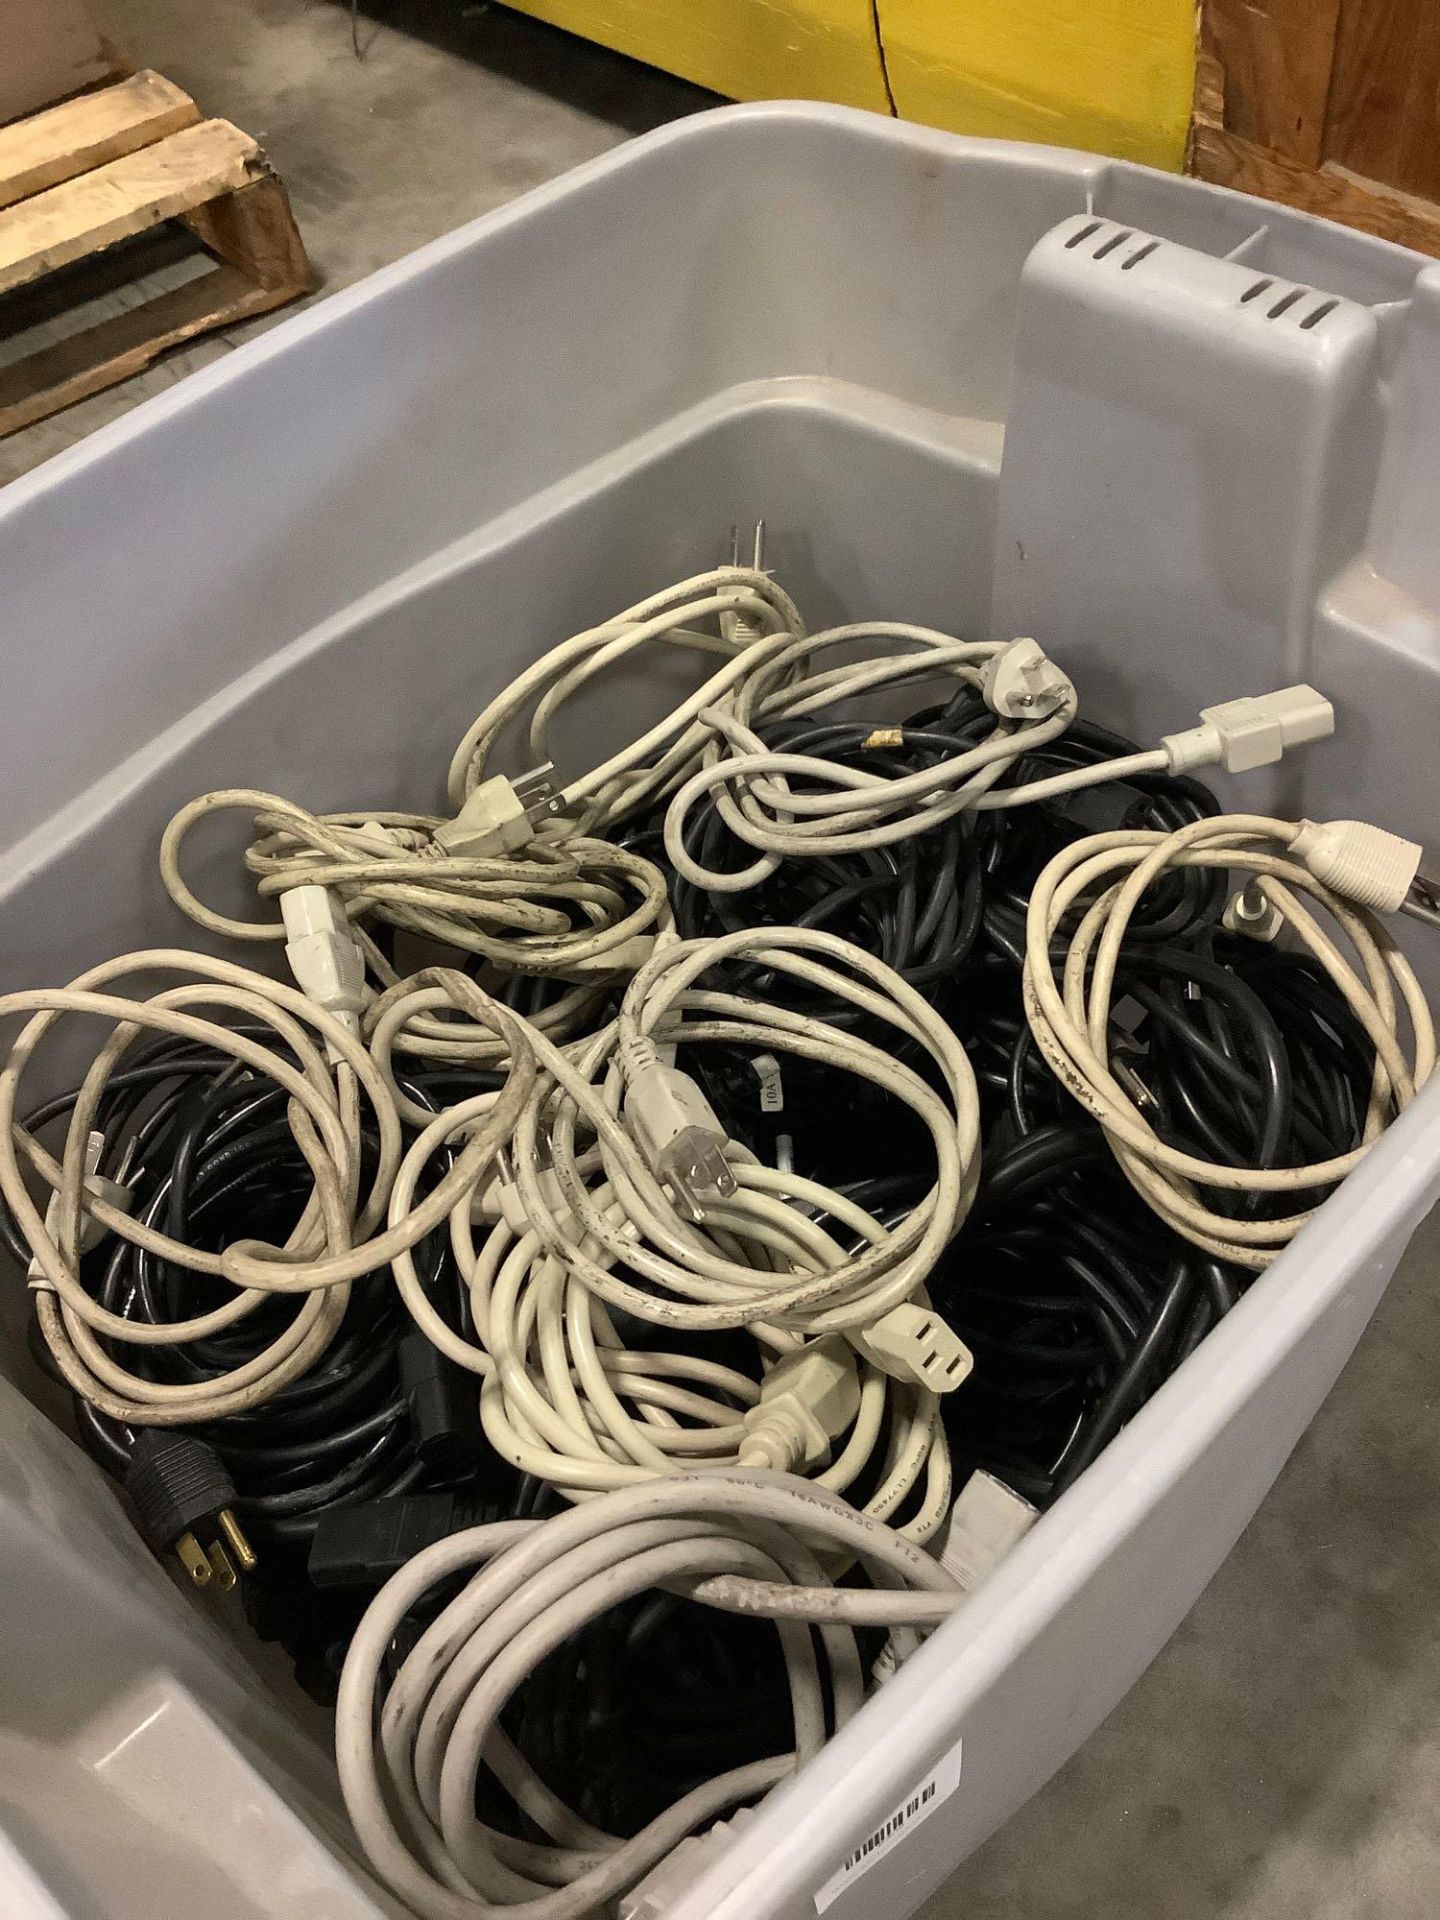 70 COMPUTER CORDS - Image 5 of 6